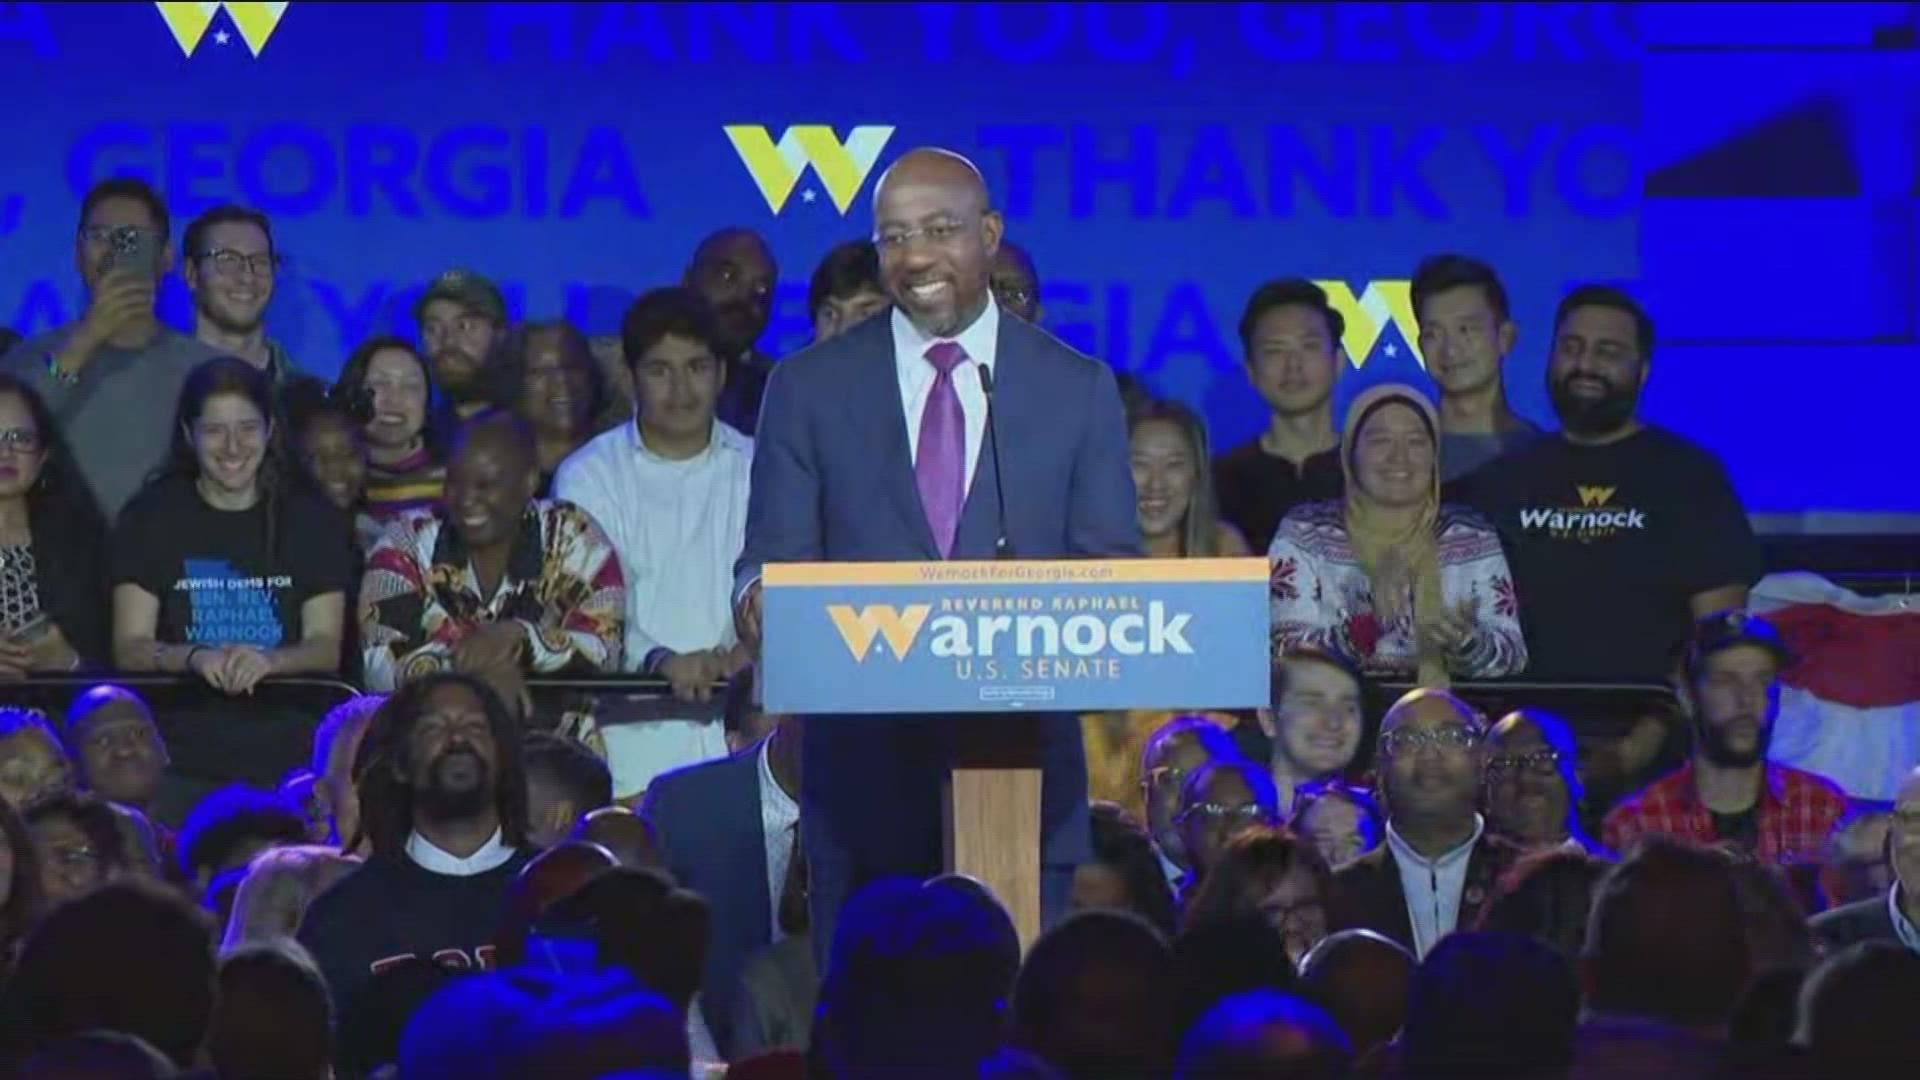 Sen. Raphael Warnock is the first African American to seal the US Senate seat for the next six years